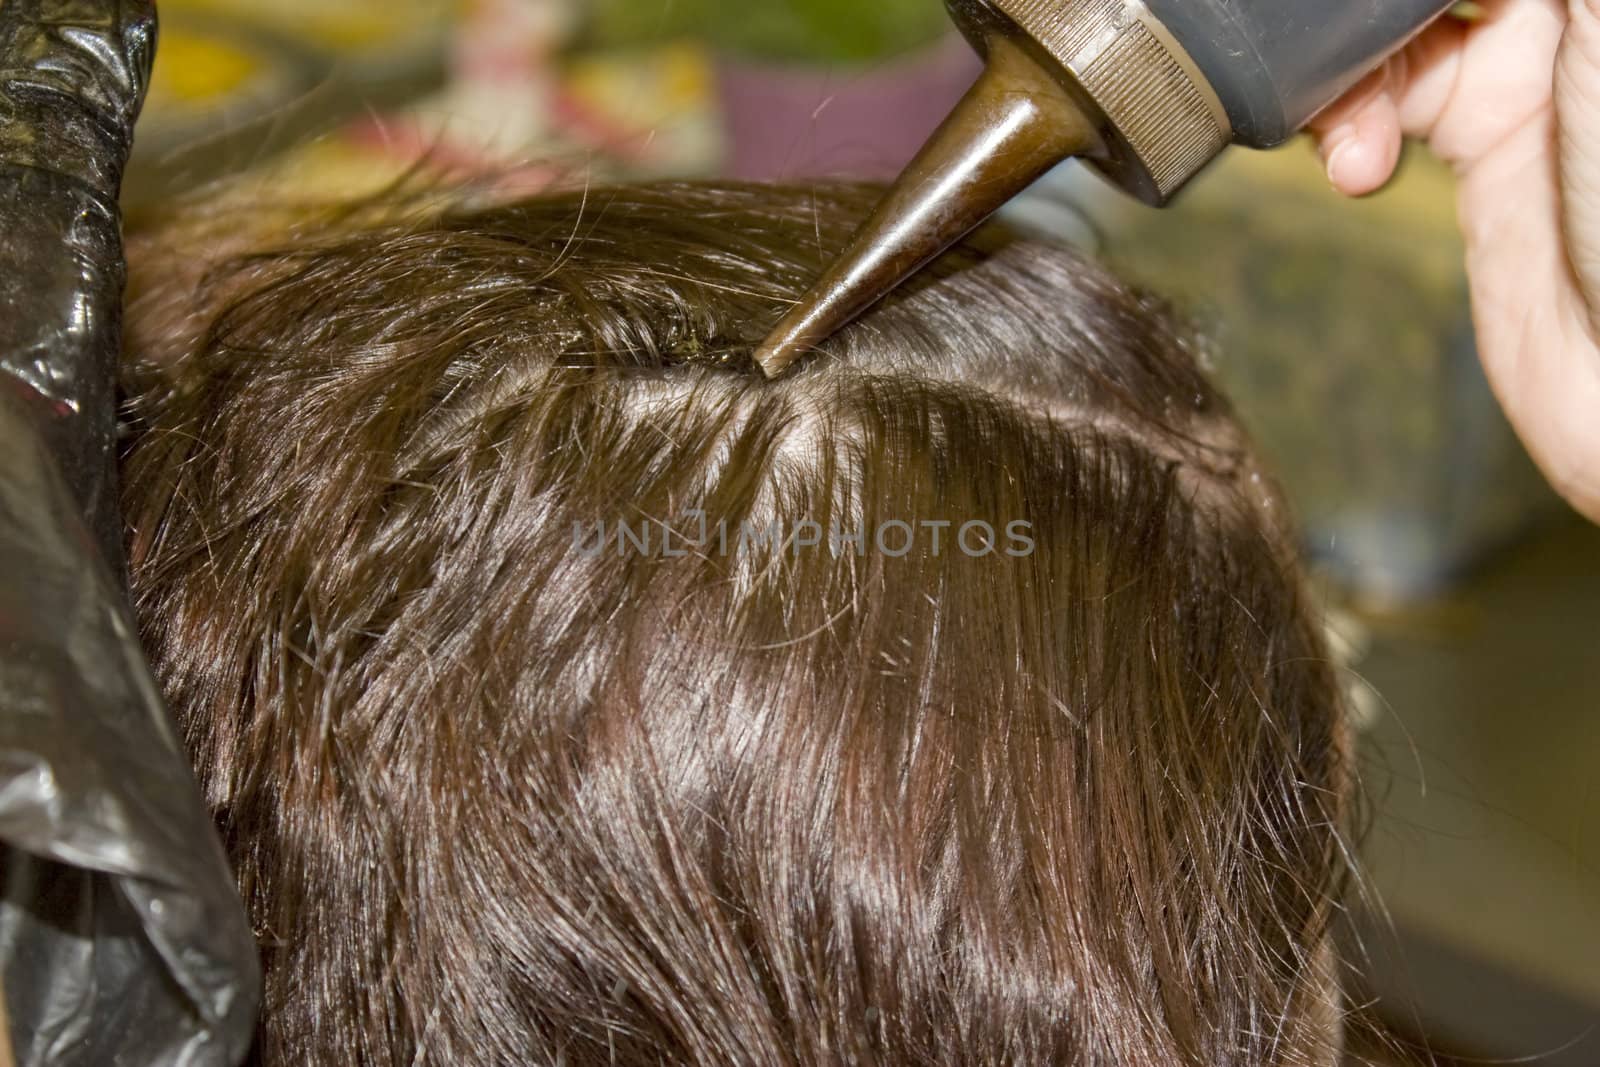 A closeup of a woman getting hair dye applied to her scalp.